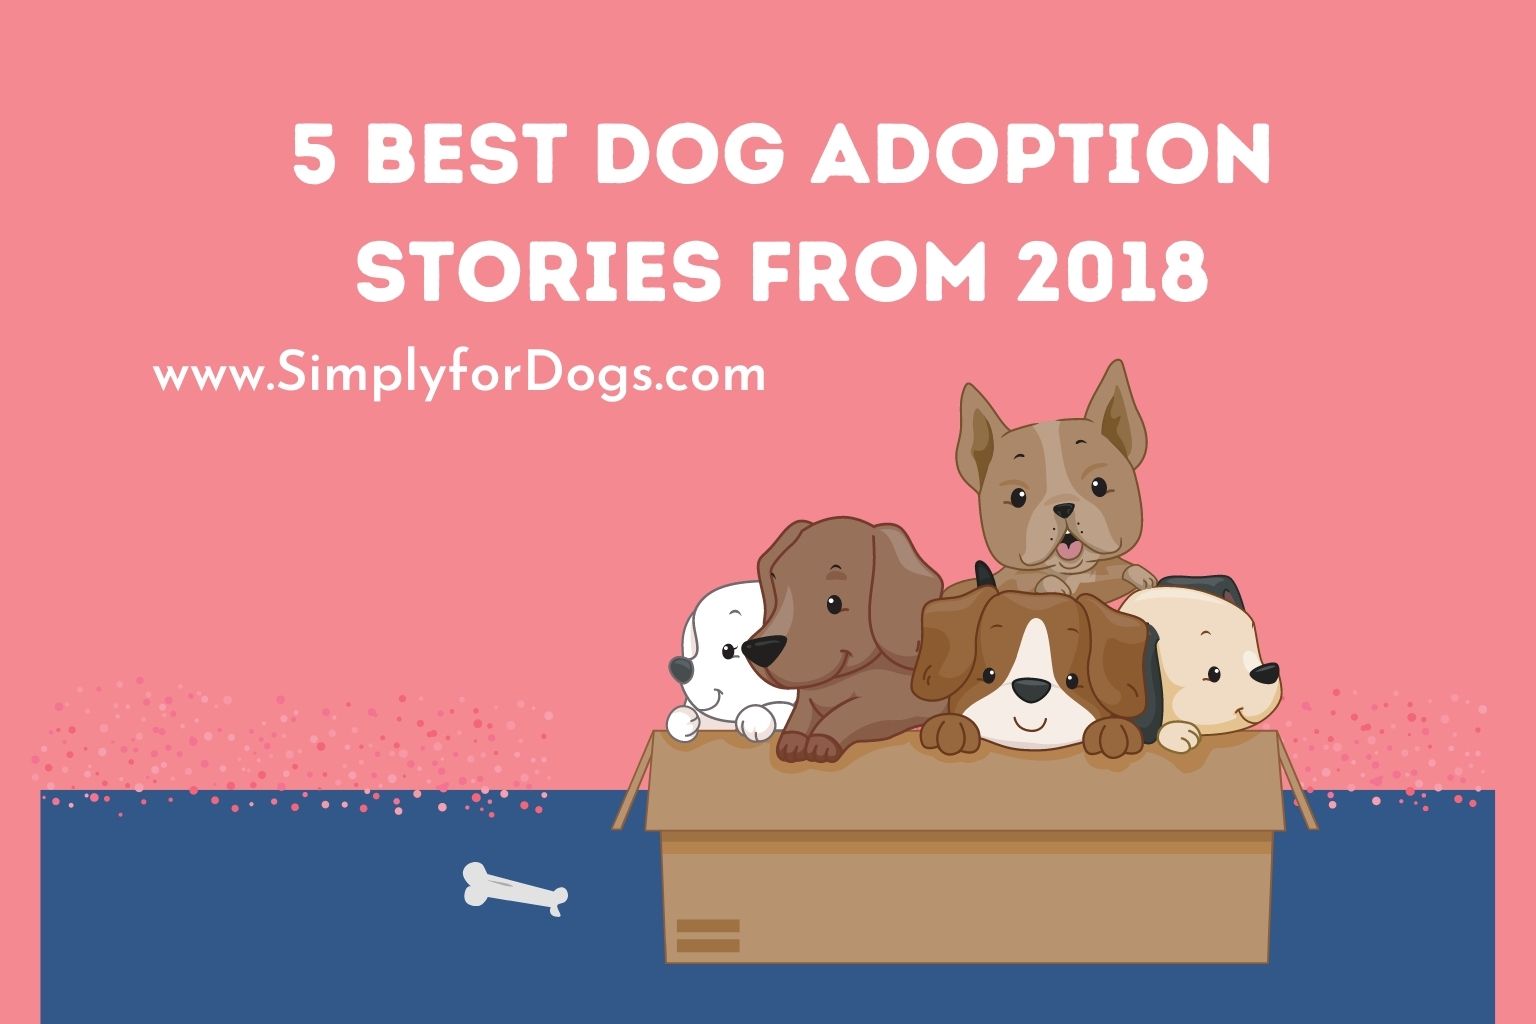 5 Best Dog Adoption Stories from 2018